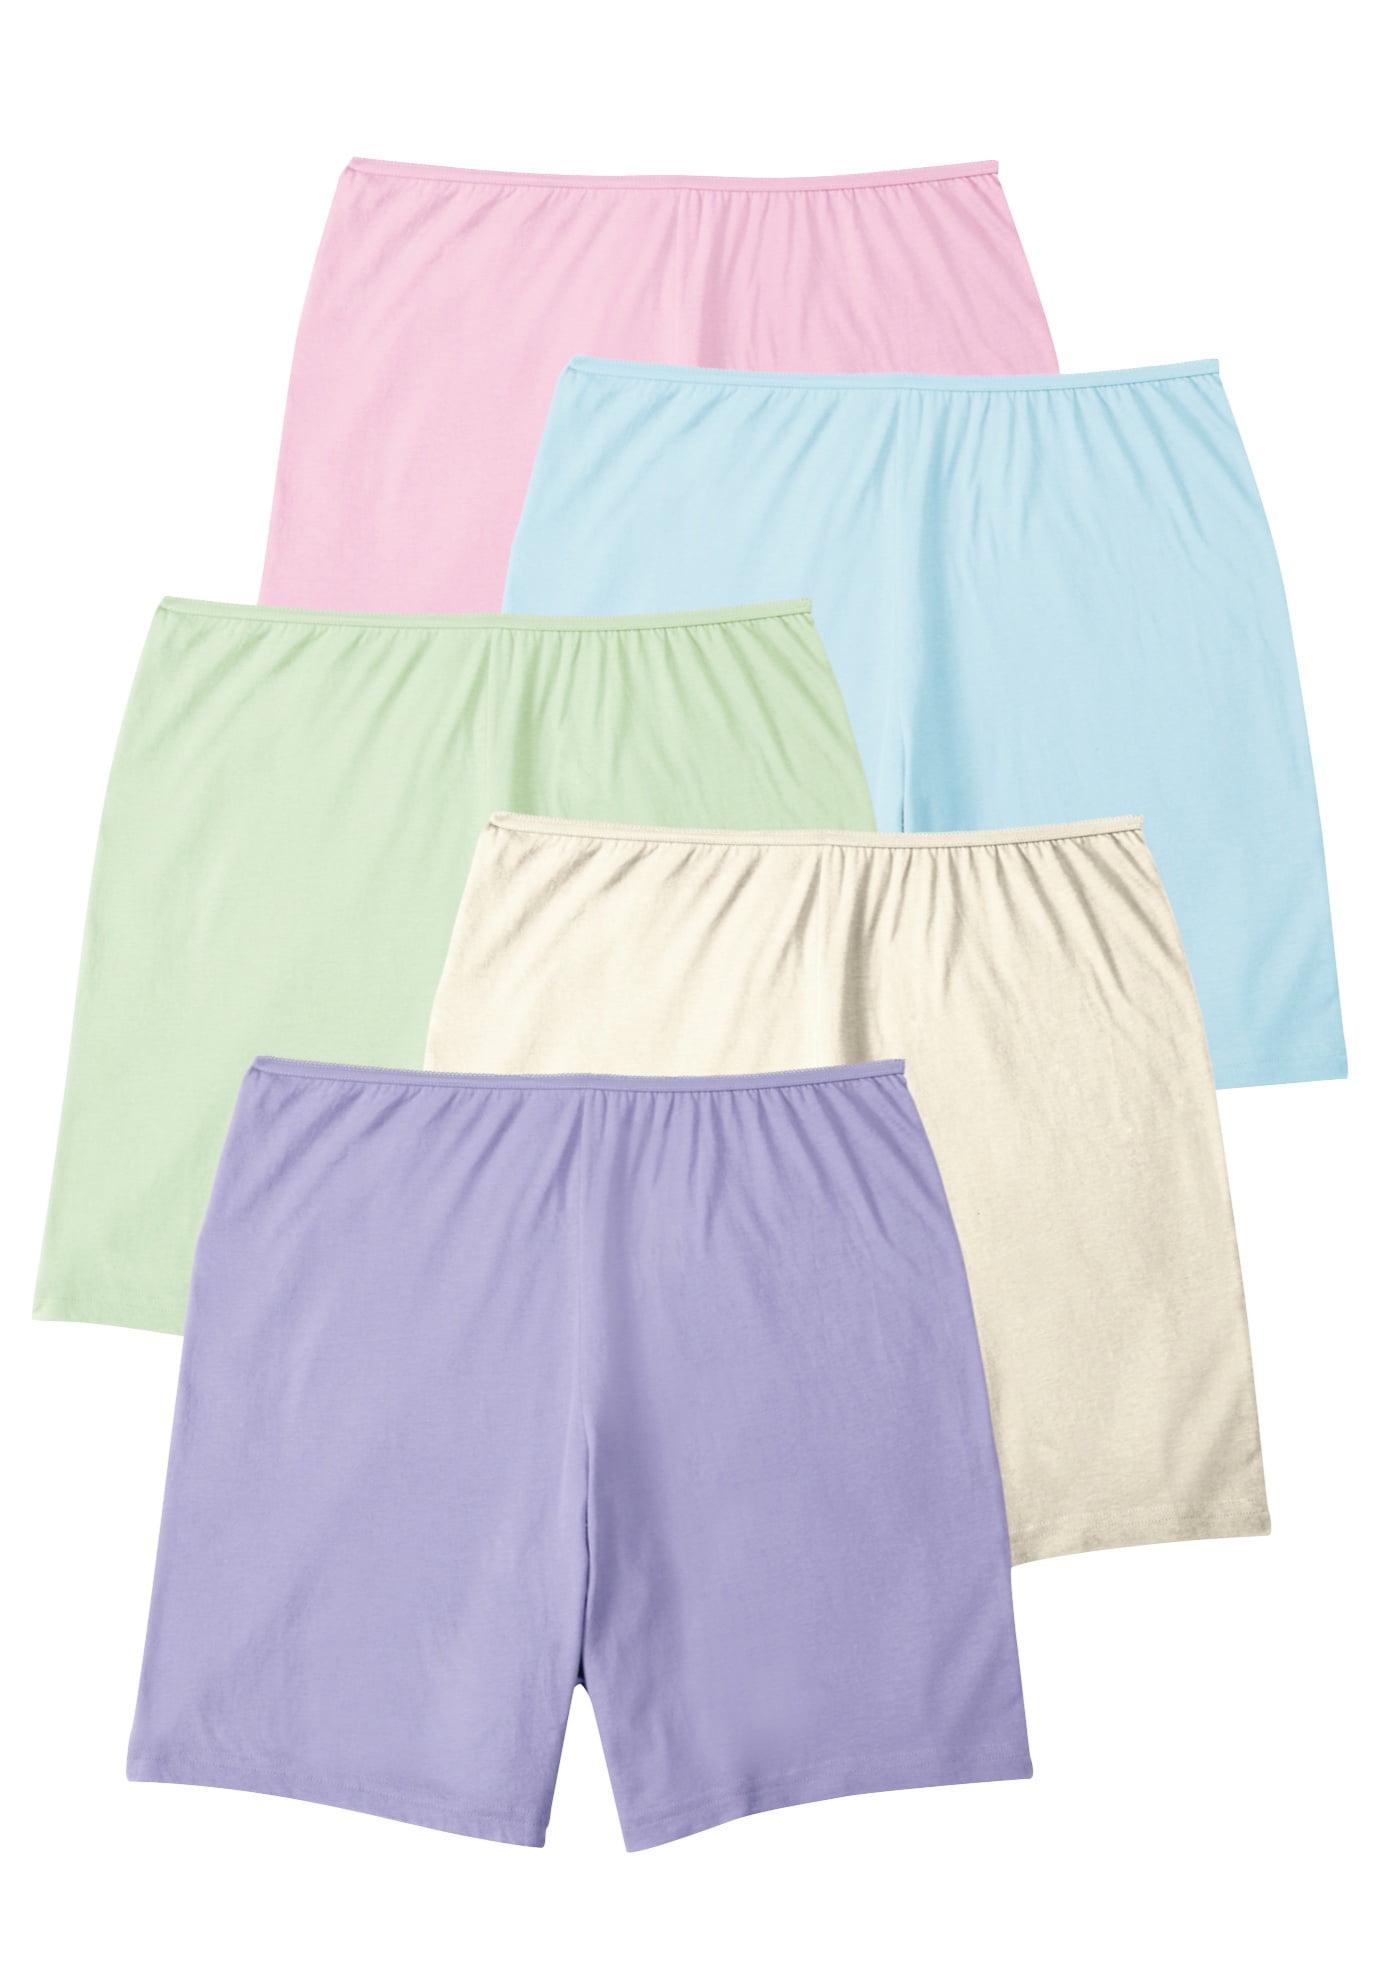 Plus Size Women's Stretch Cotton Boxer 3-Pack by Comfort Choice in Basic  Pack (Size 14) Underwear - Yahoo Shopping